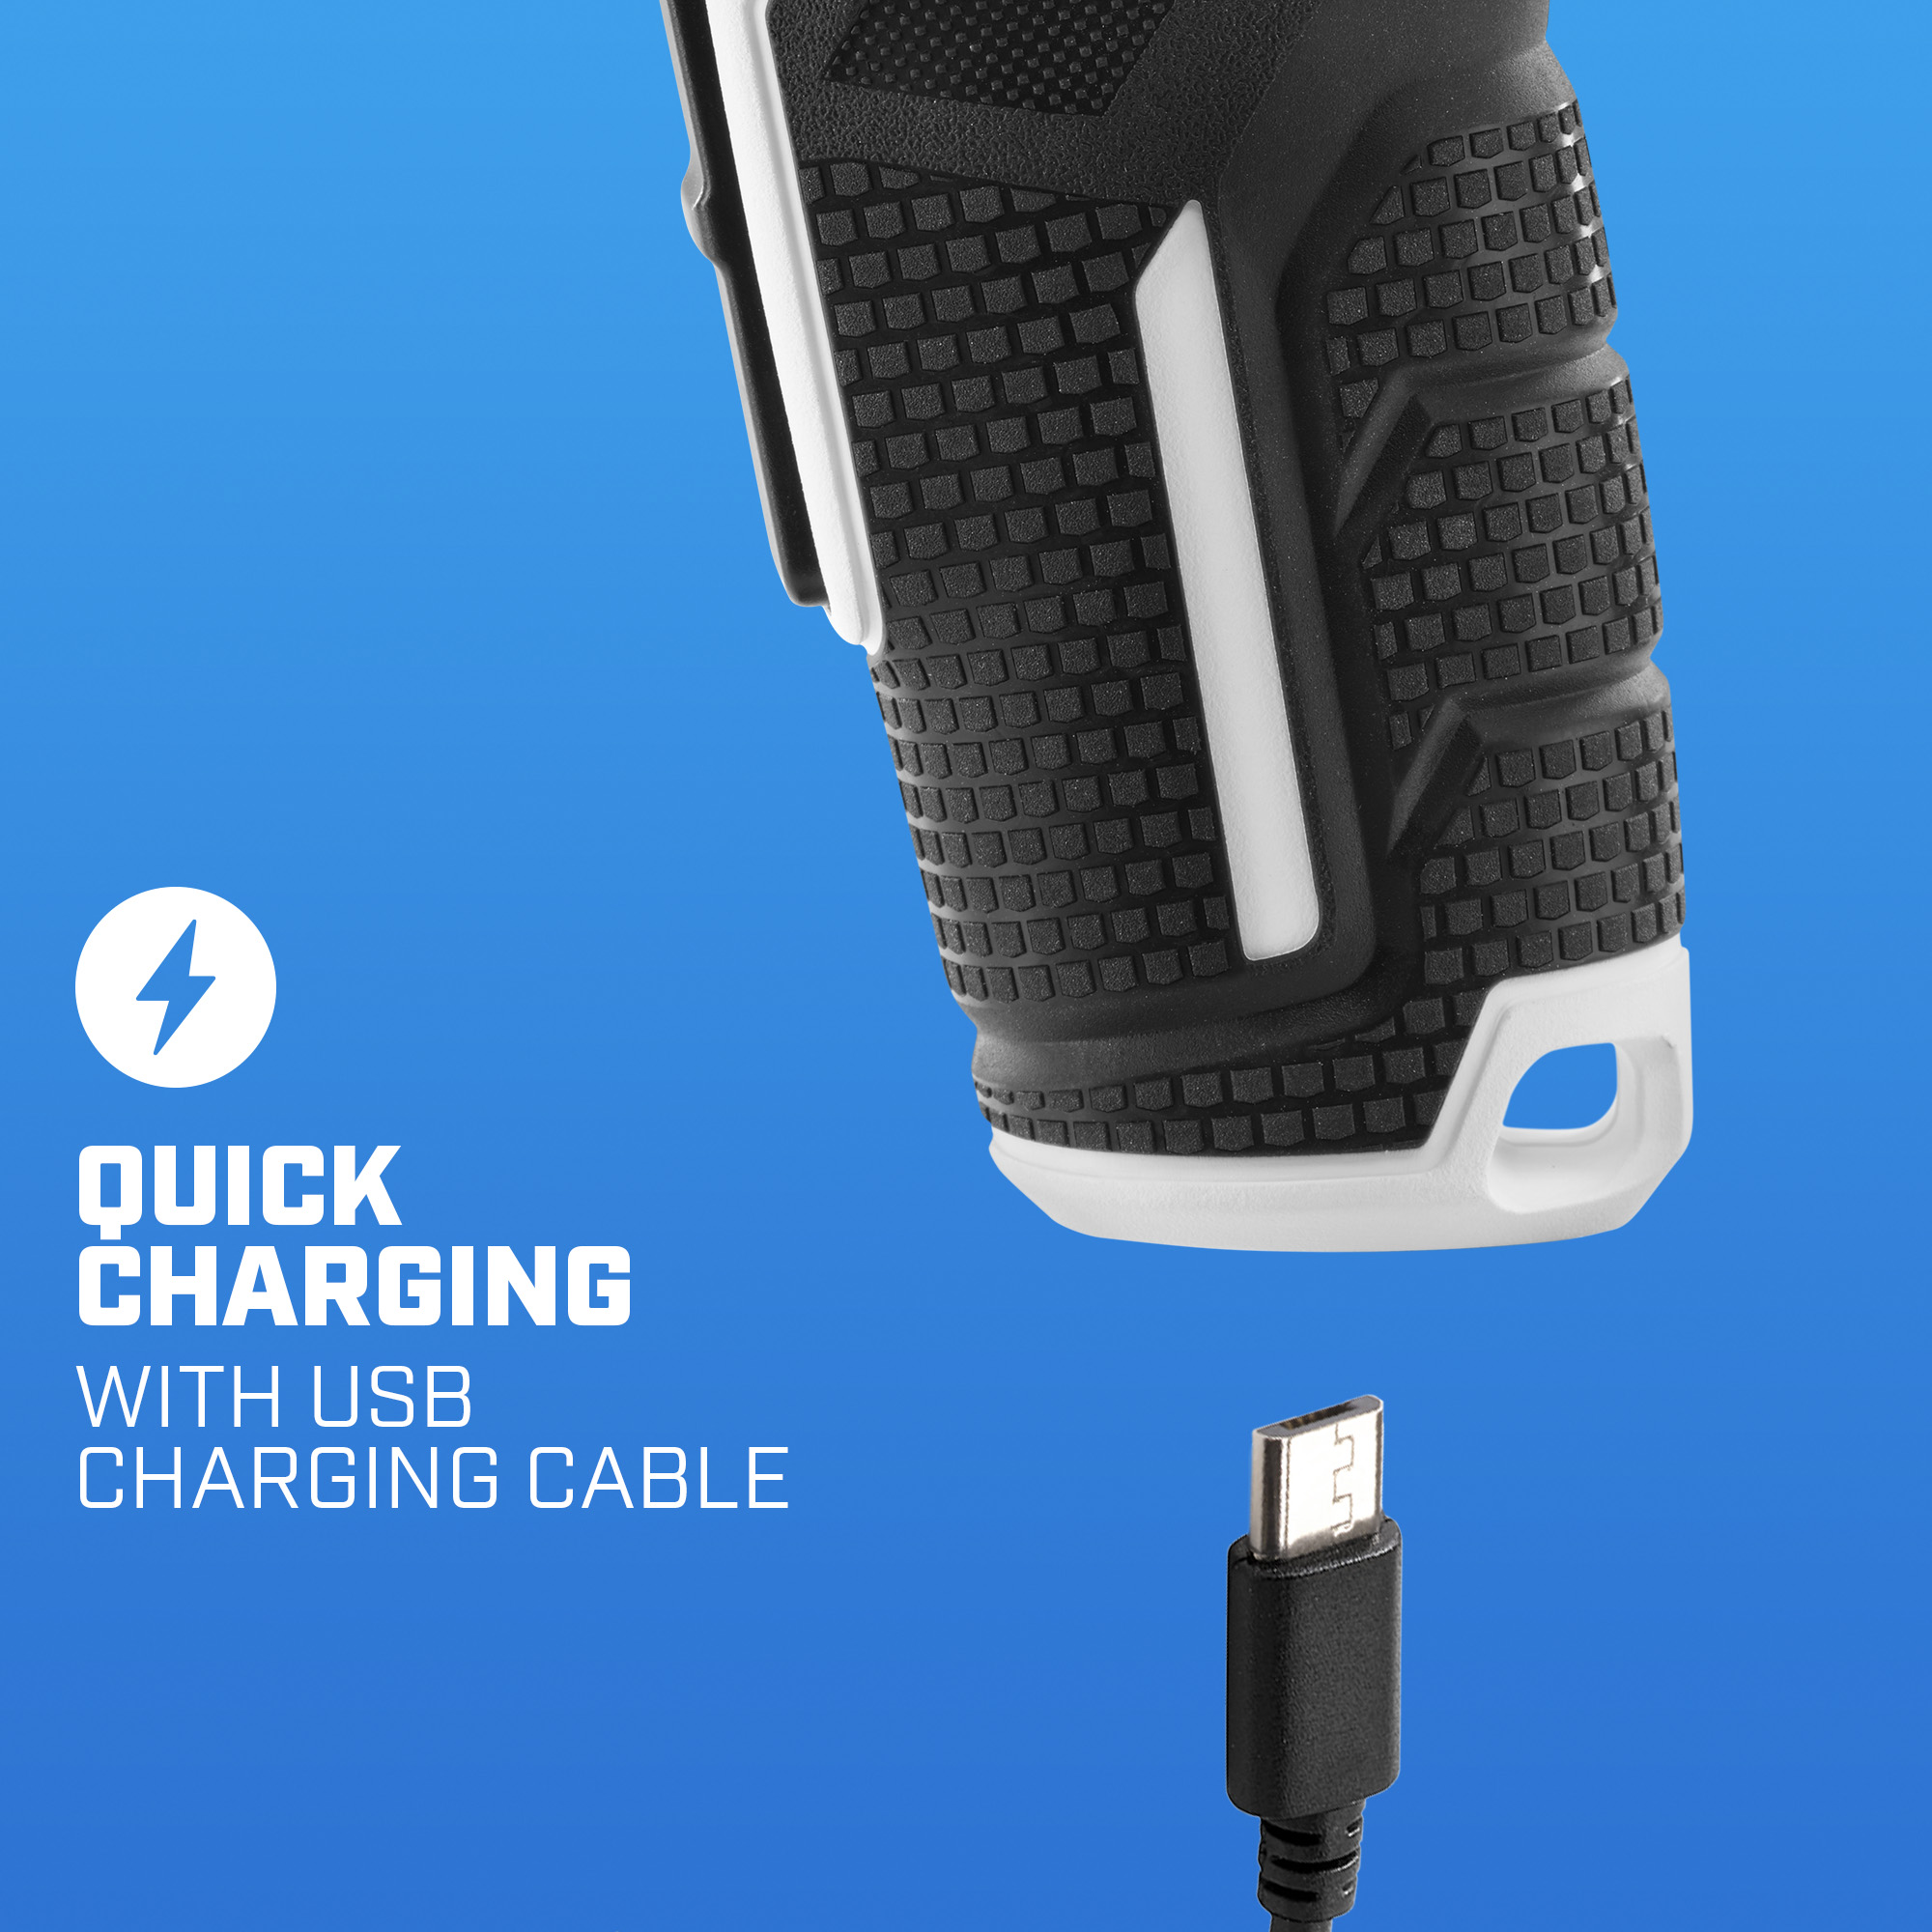 quick charging with USB charging cable